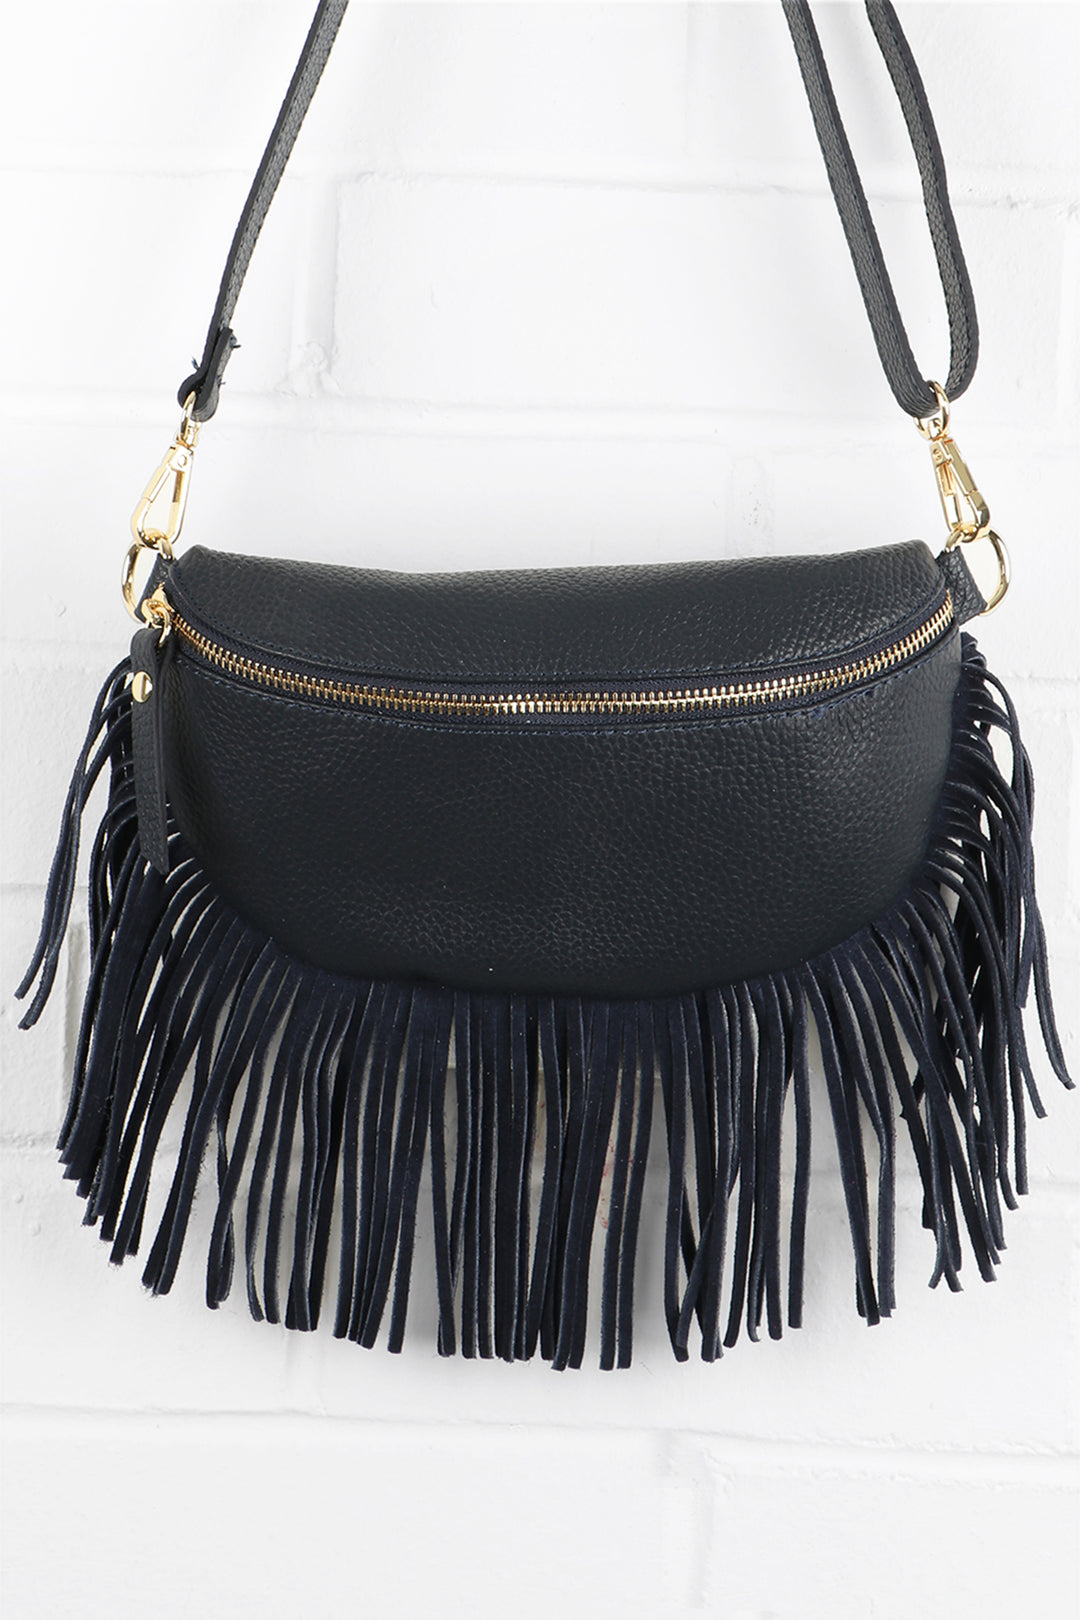 navy blue leather halfmoon bag with fringed trim and zip closure